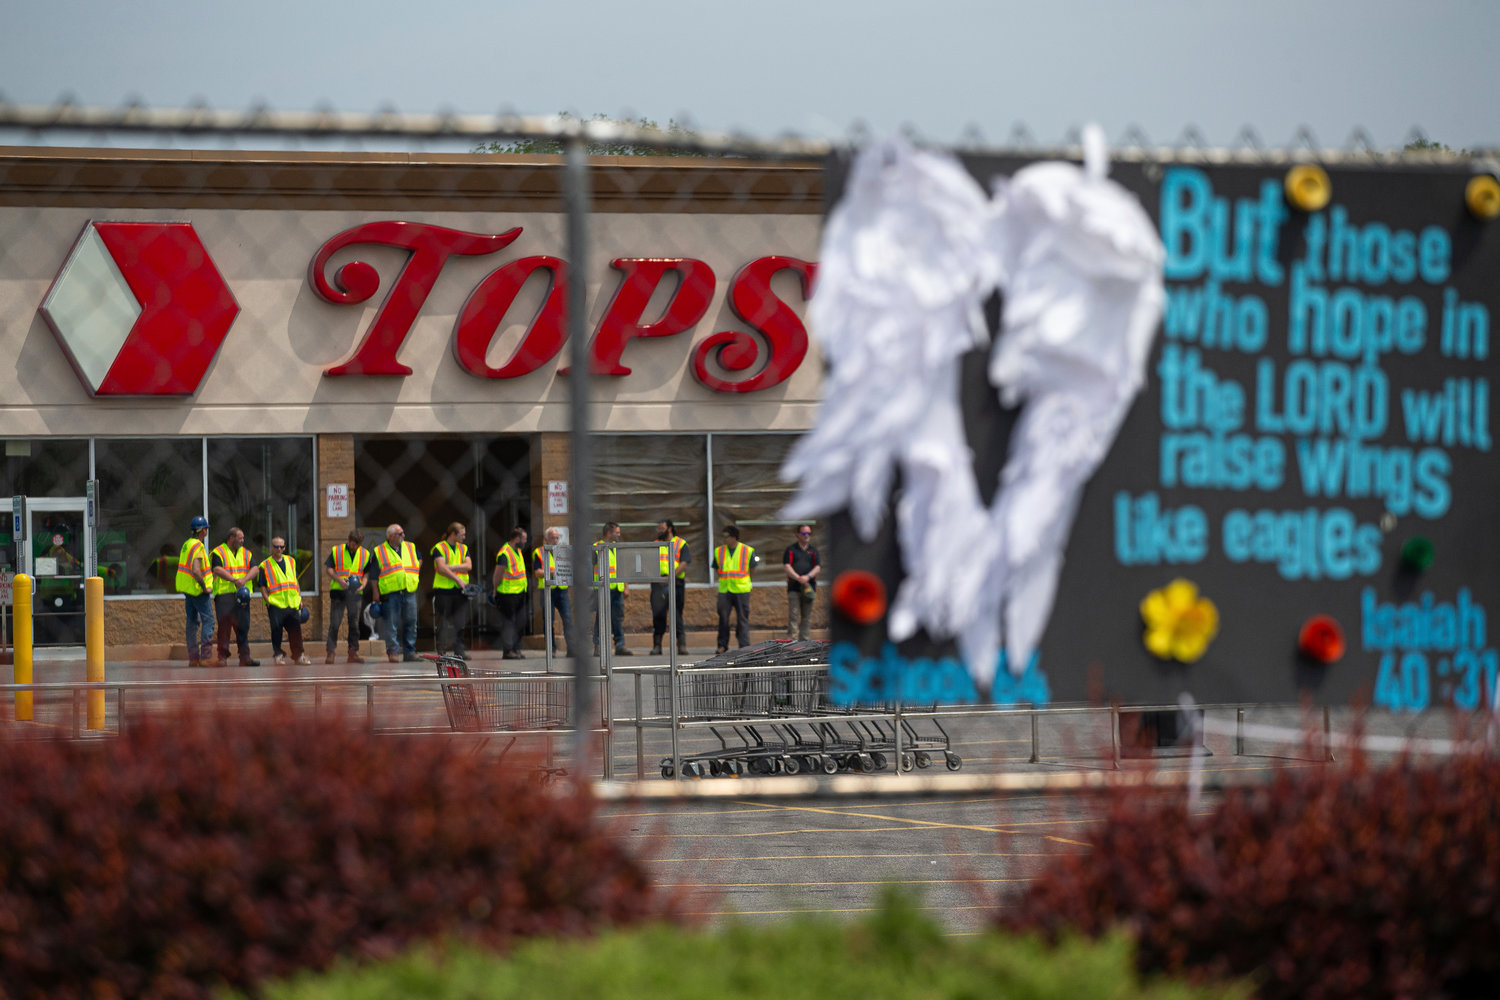 FILE - Investigators stand outside during a moment of silence for the victims of the Buffalo supermarket shooting outside the Tops Friendly Market on Saturday, May 21, 2022, in Buffalo, N.Y. Long before an 18-year-old avowed white supremacist inflicted terror at a Buffalo supermarket, the city's Black neighborhoods, like many others around the nation, had been dealing with wounds that are generations old. (AP Photo/Joshua Bessex, File)